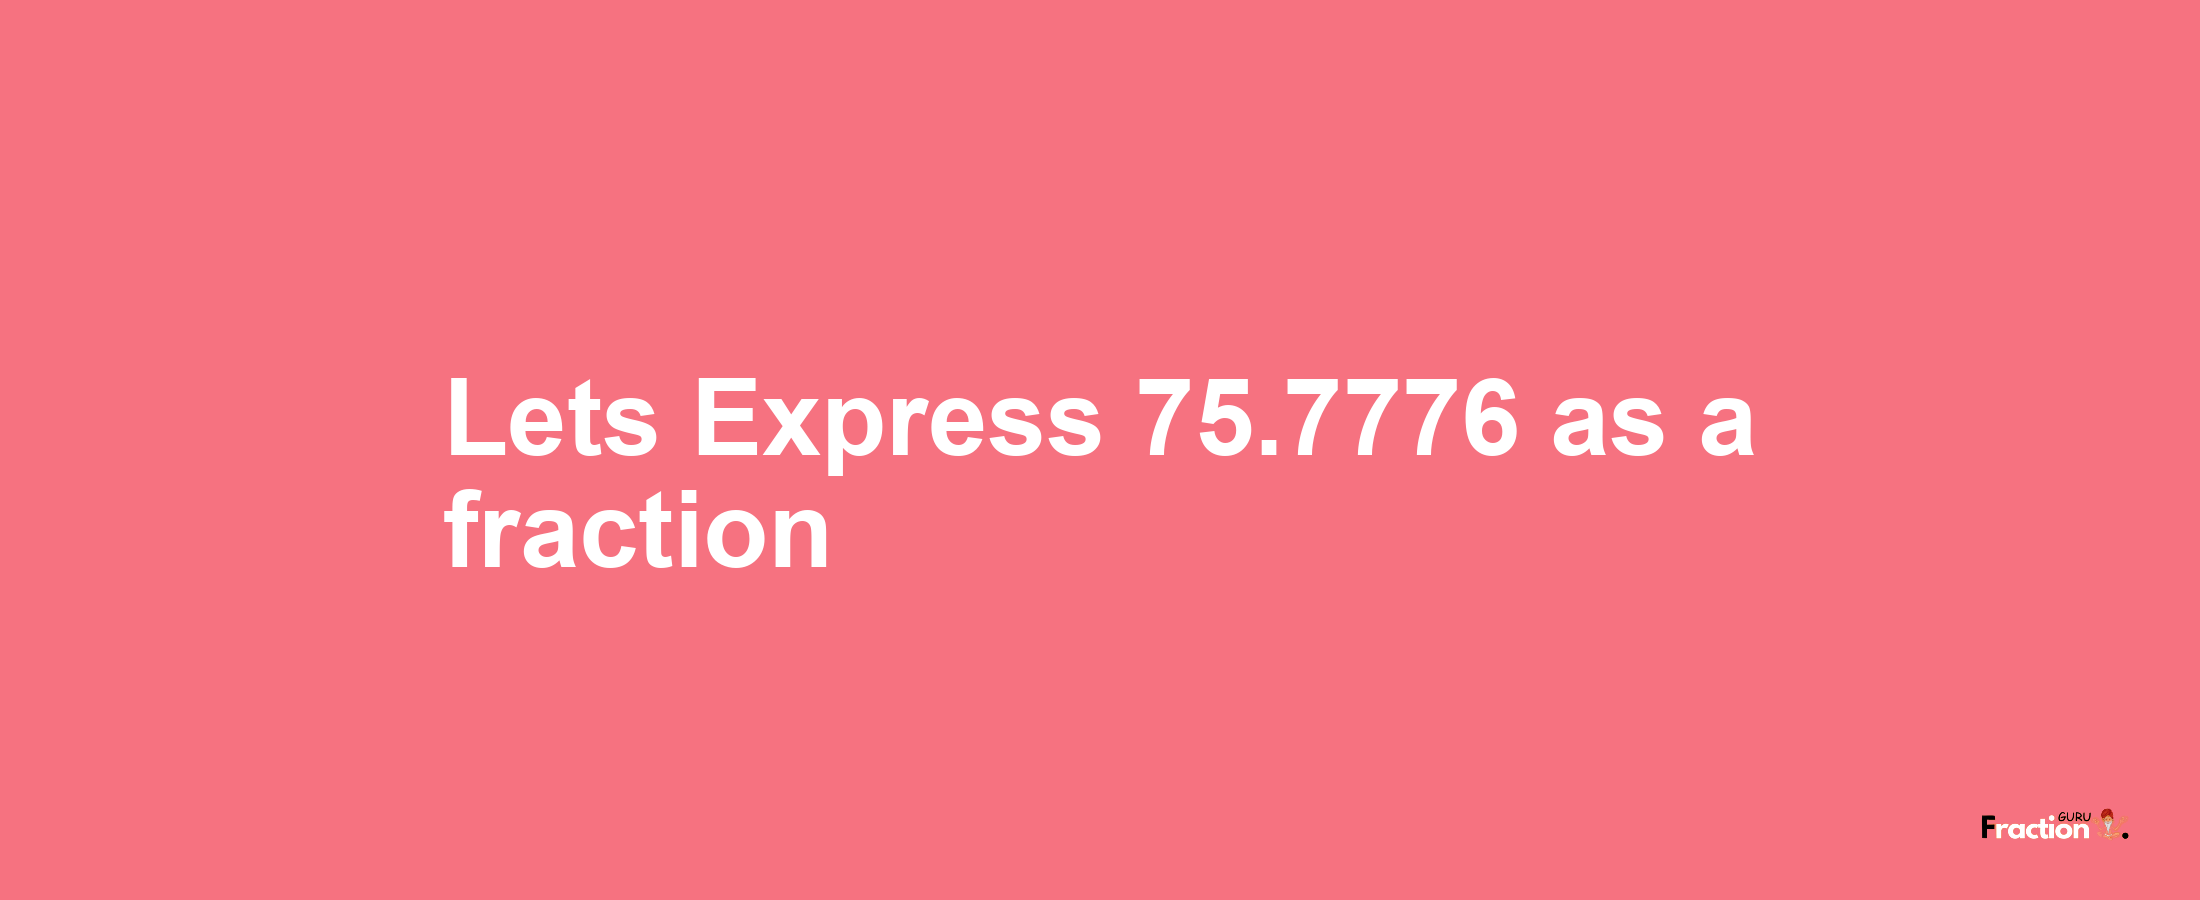 Lets Express 75.7776 as afraction